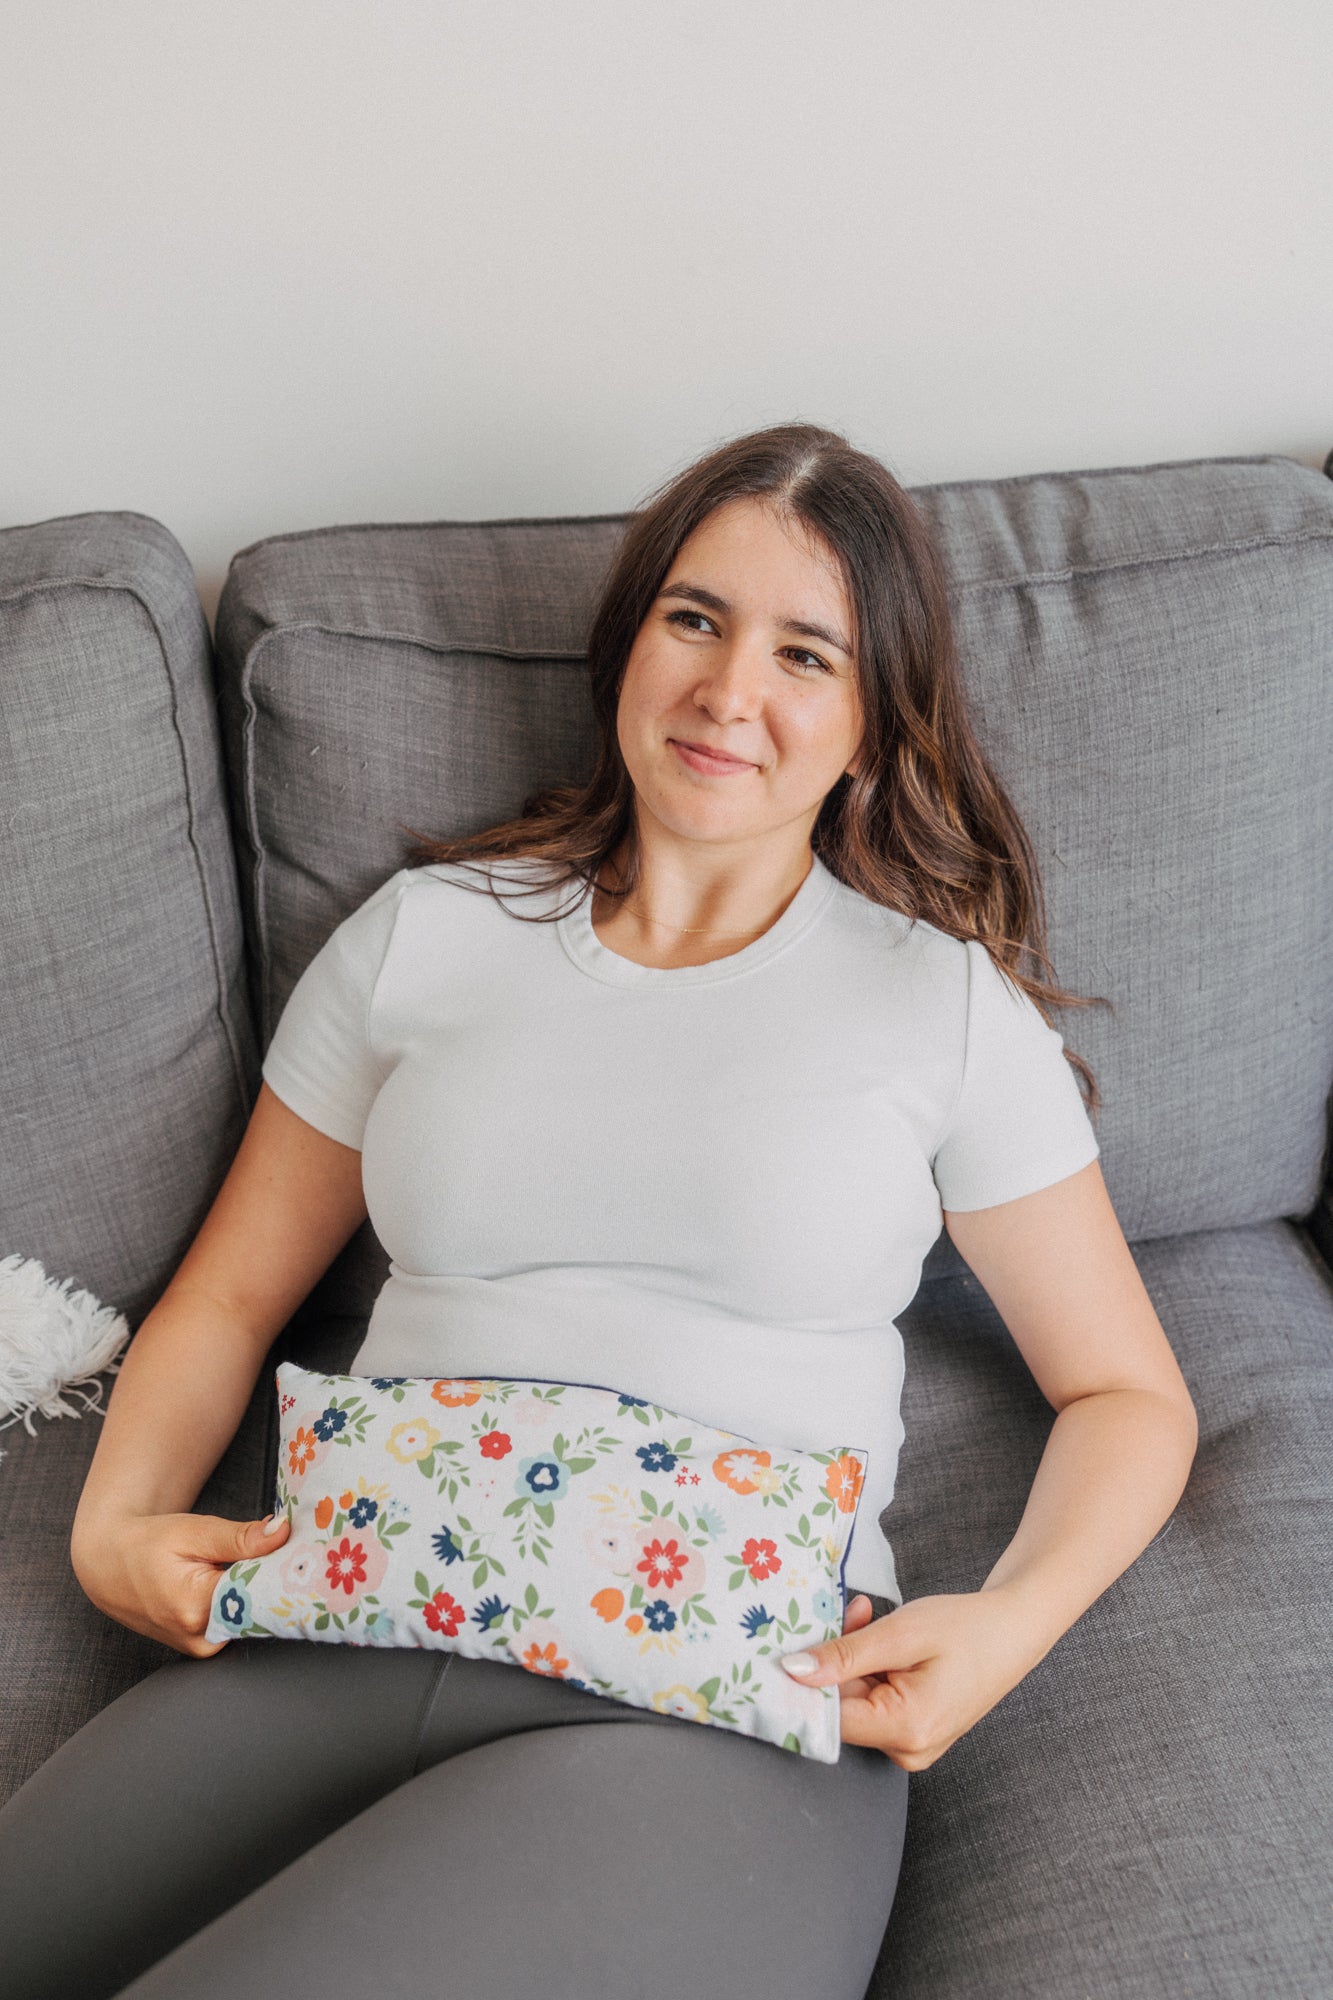 lady with navy floral microwavable heating pad on stomach to soothe cramps